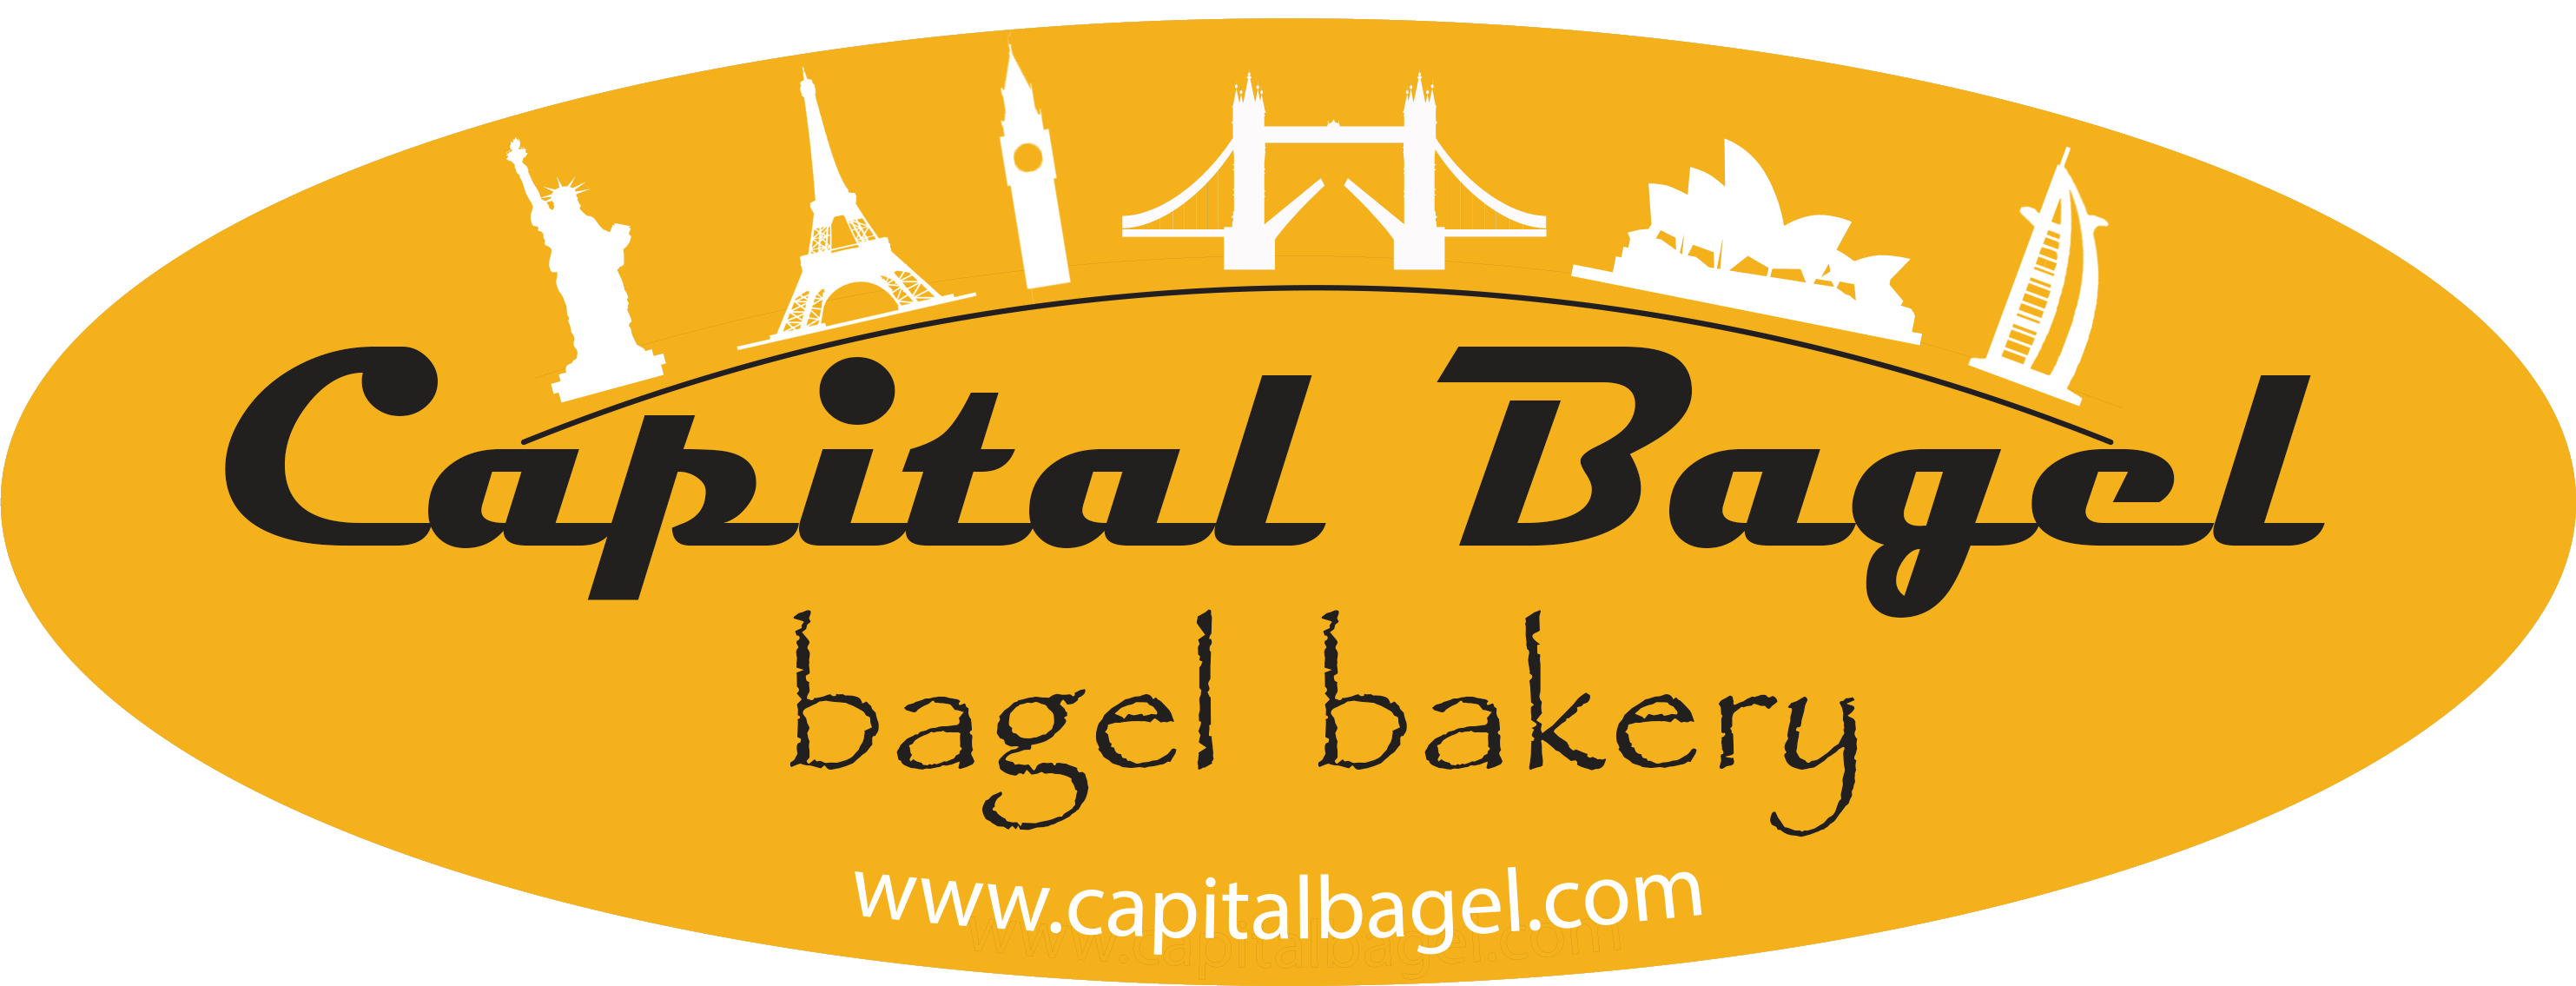 Capital bagel logo with orange colour backing 2023 PNG Good Oct 2023